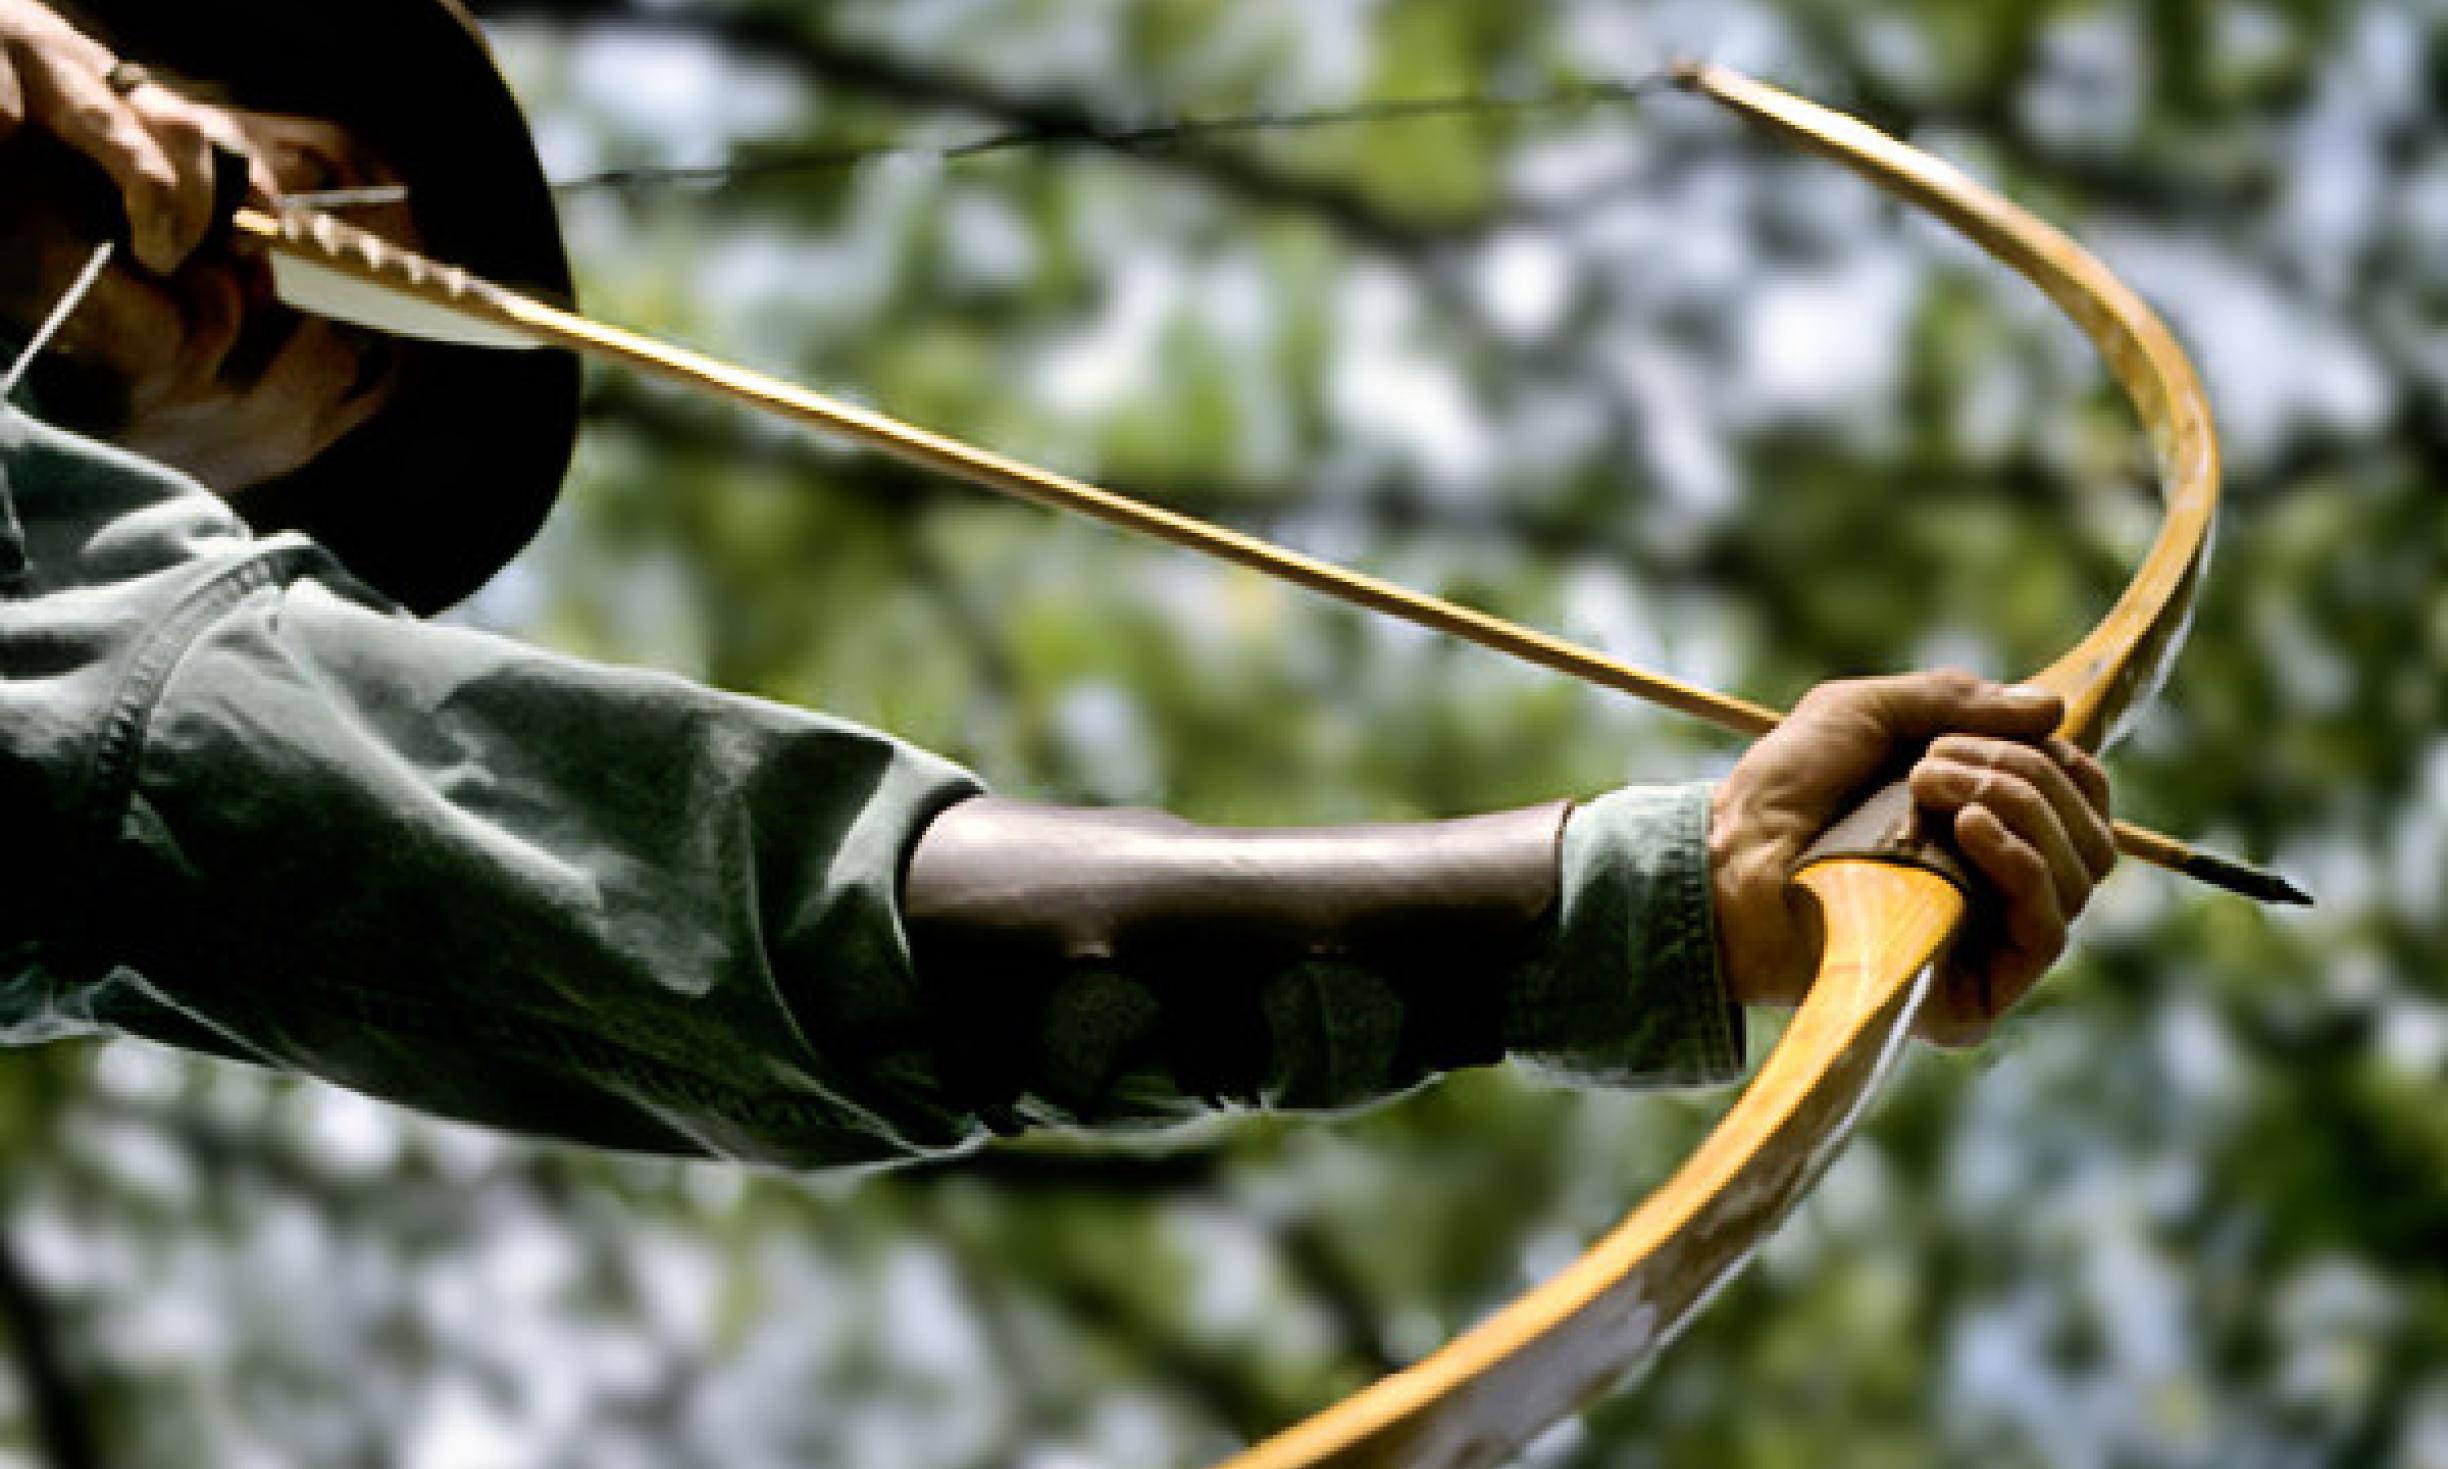 Know how to make your own bow? Tips for building a survival bow